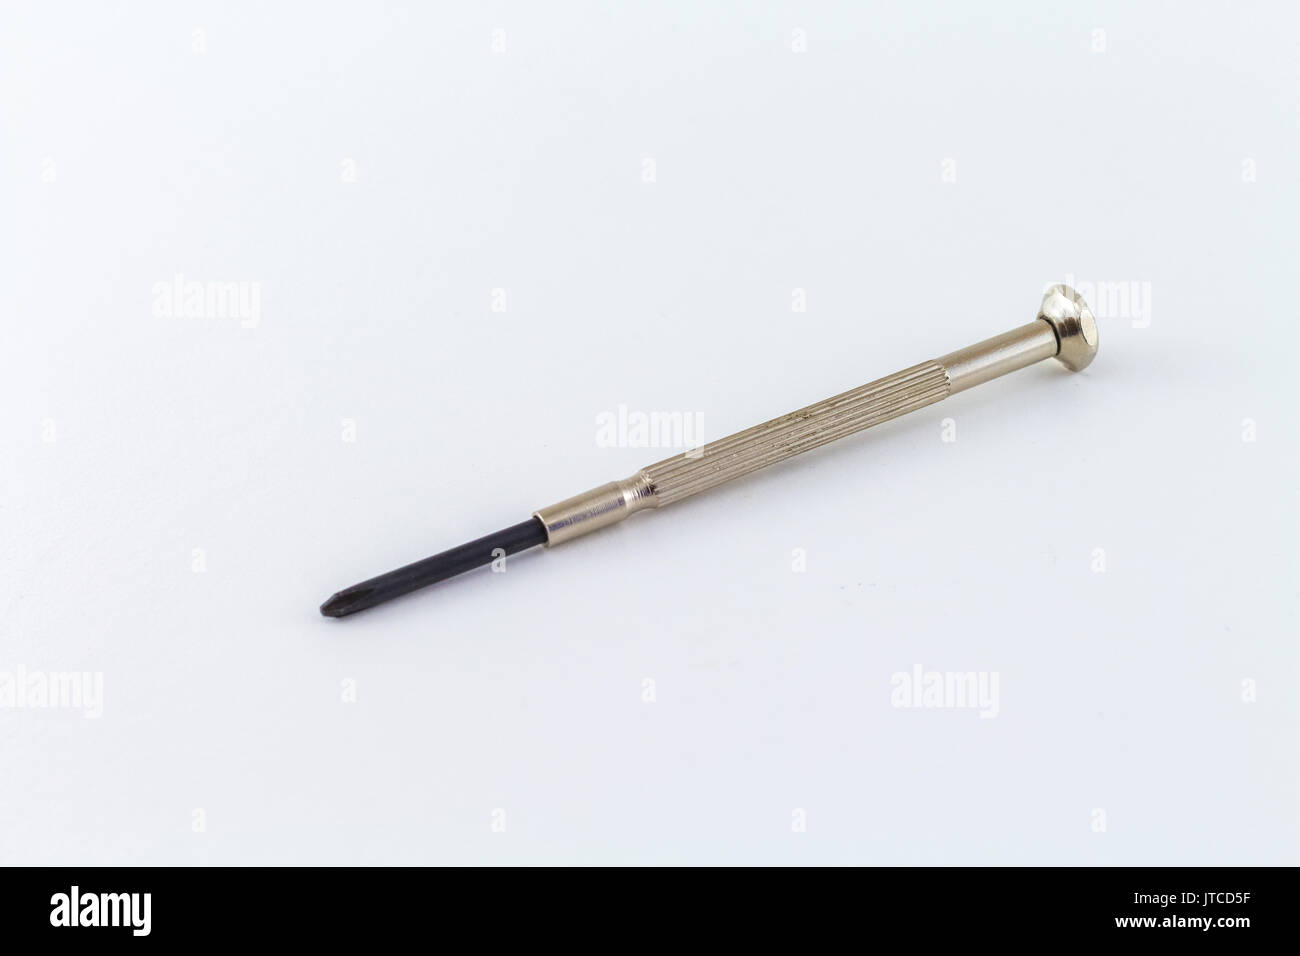 screwdriver mini tool on a white background chromed steel with crosshead tip Stock Photo